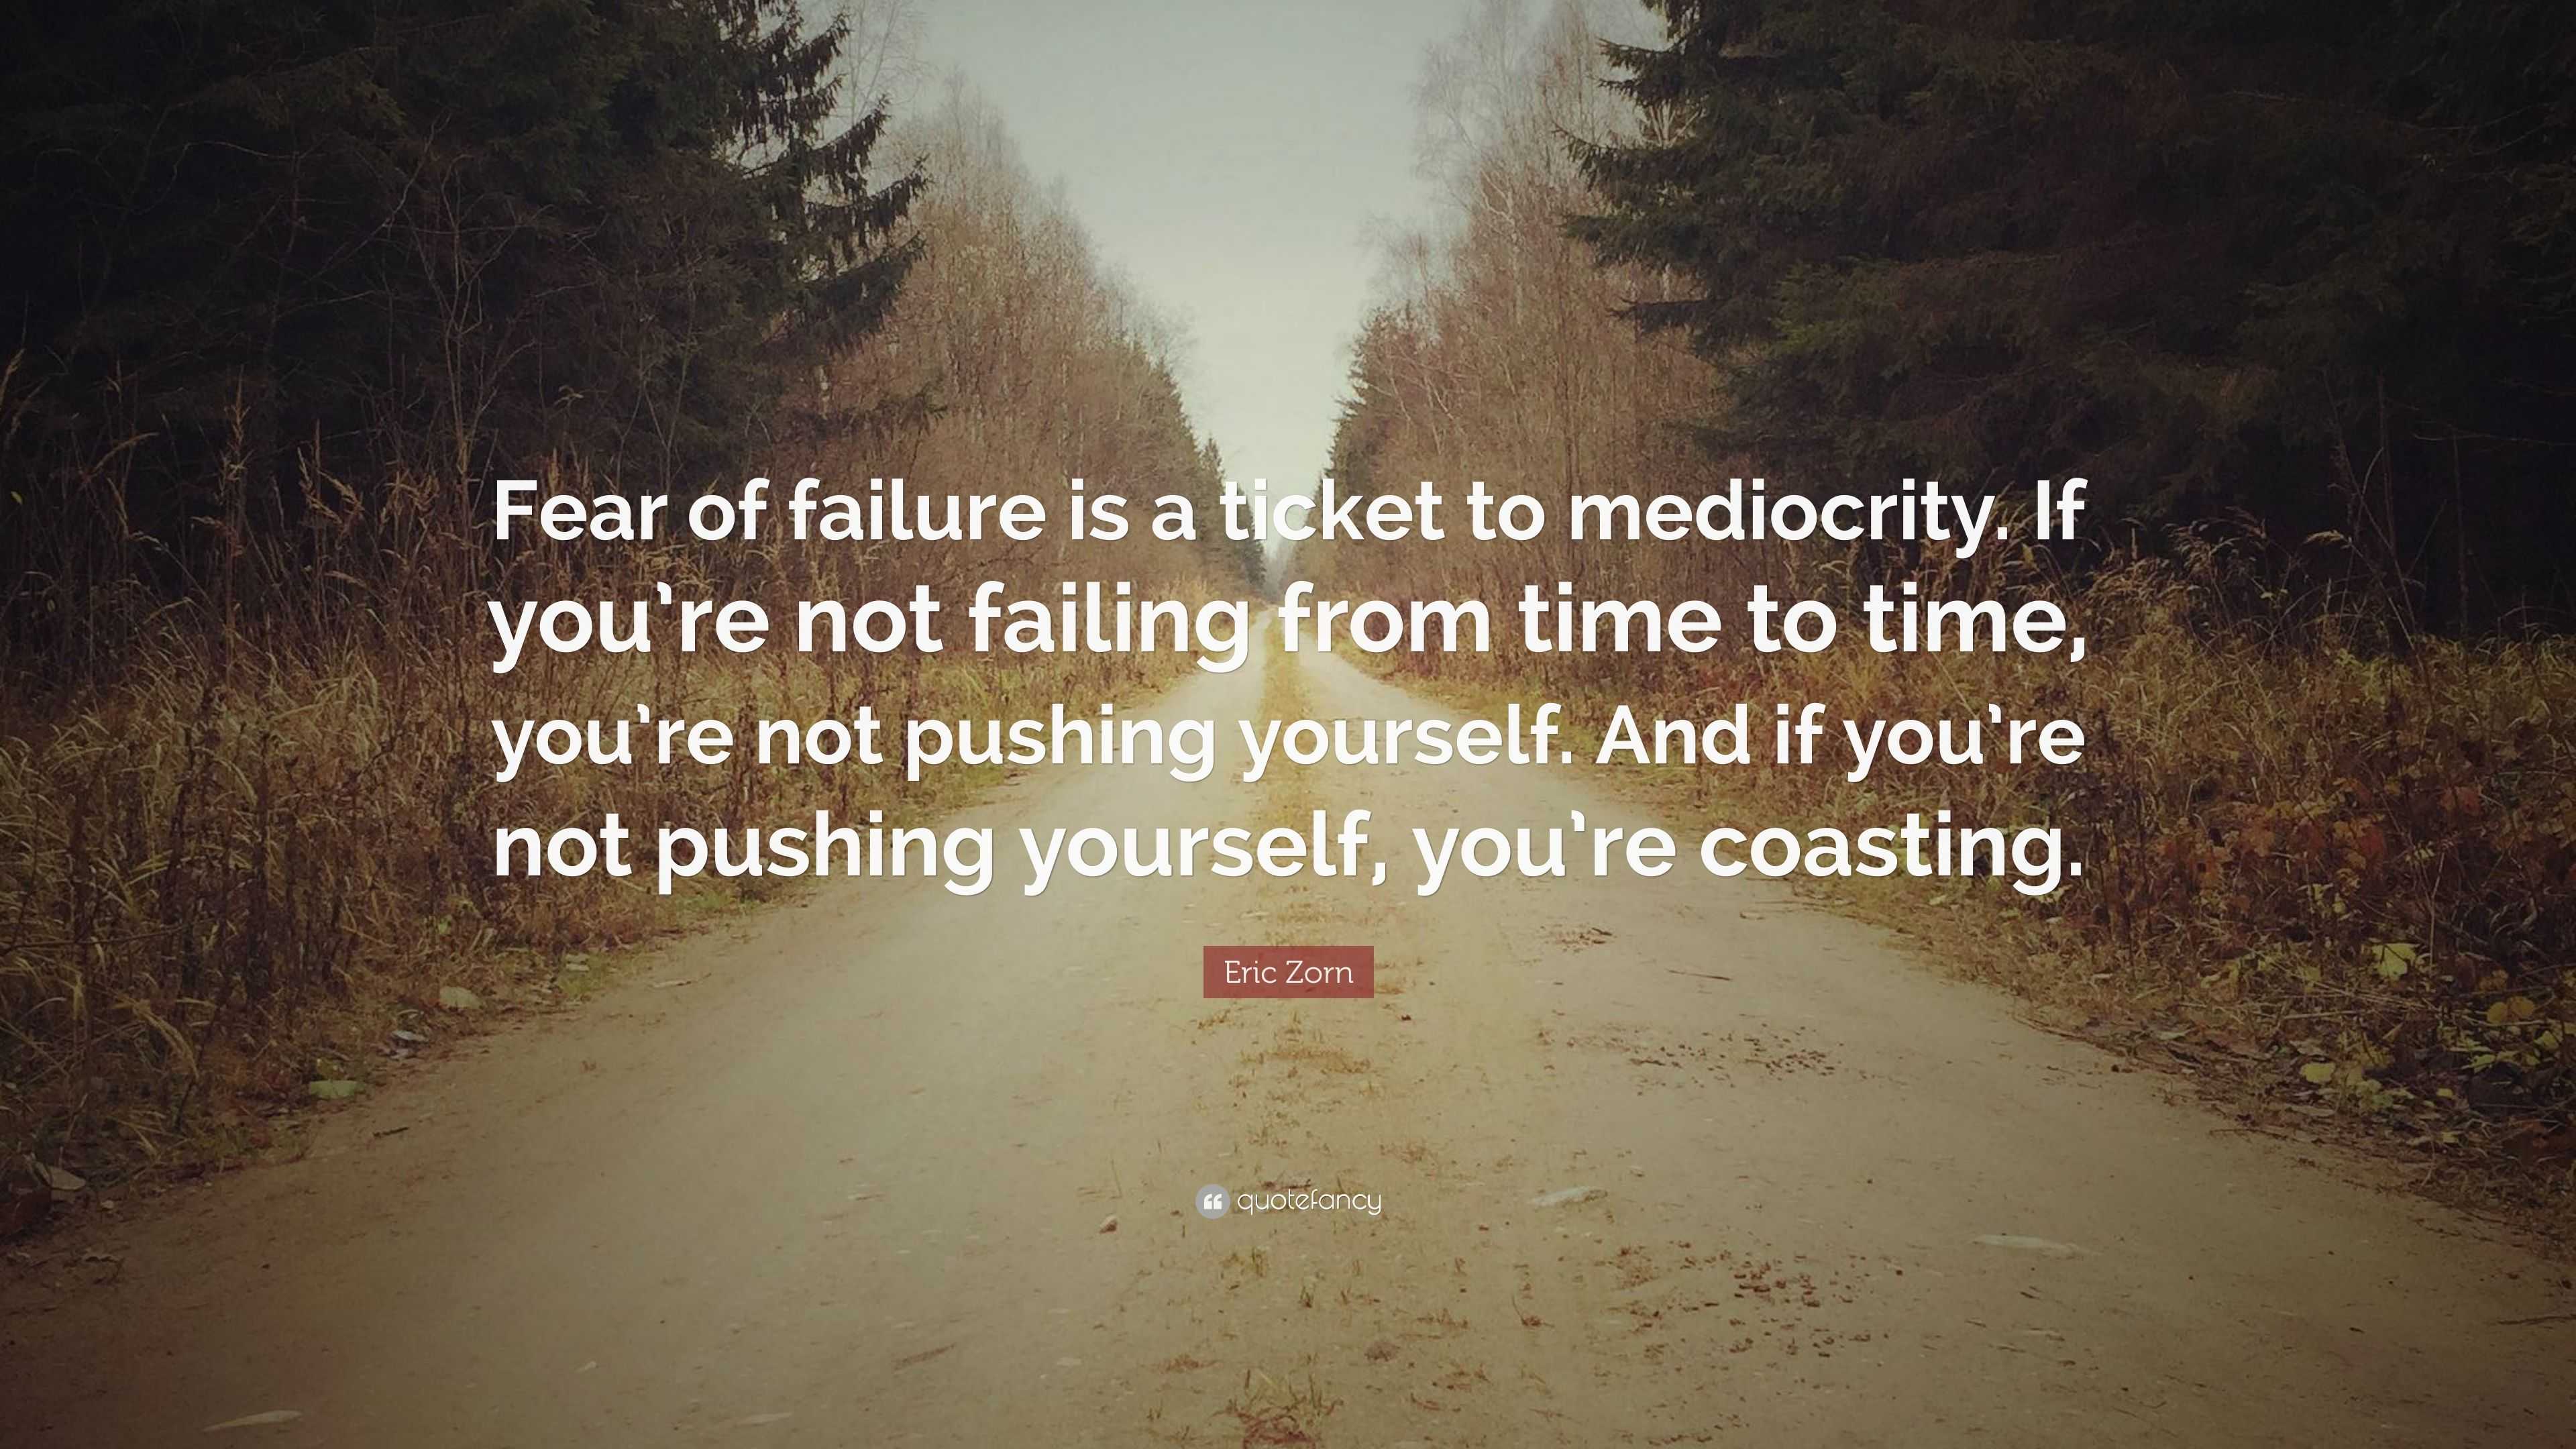 Eric Zorn Quote: “Fear of failure is a ticket to mediocrity. If you’re